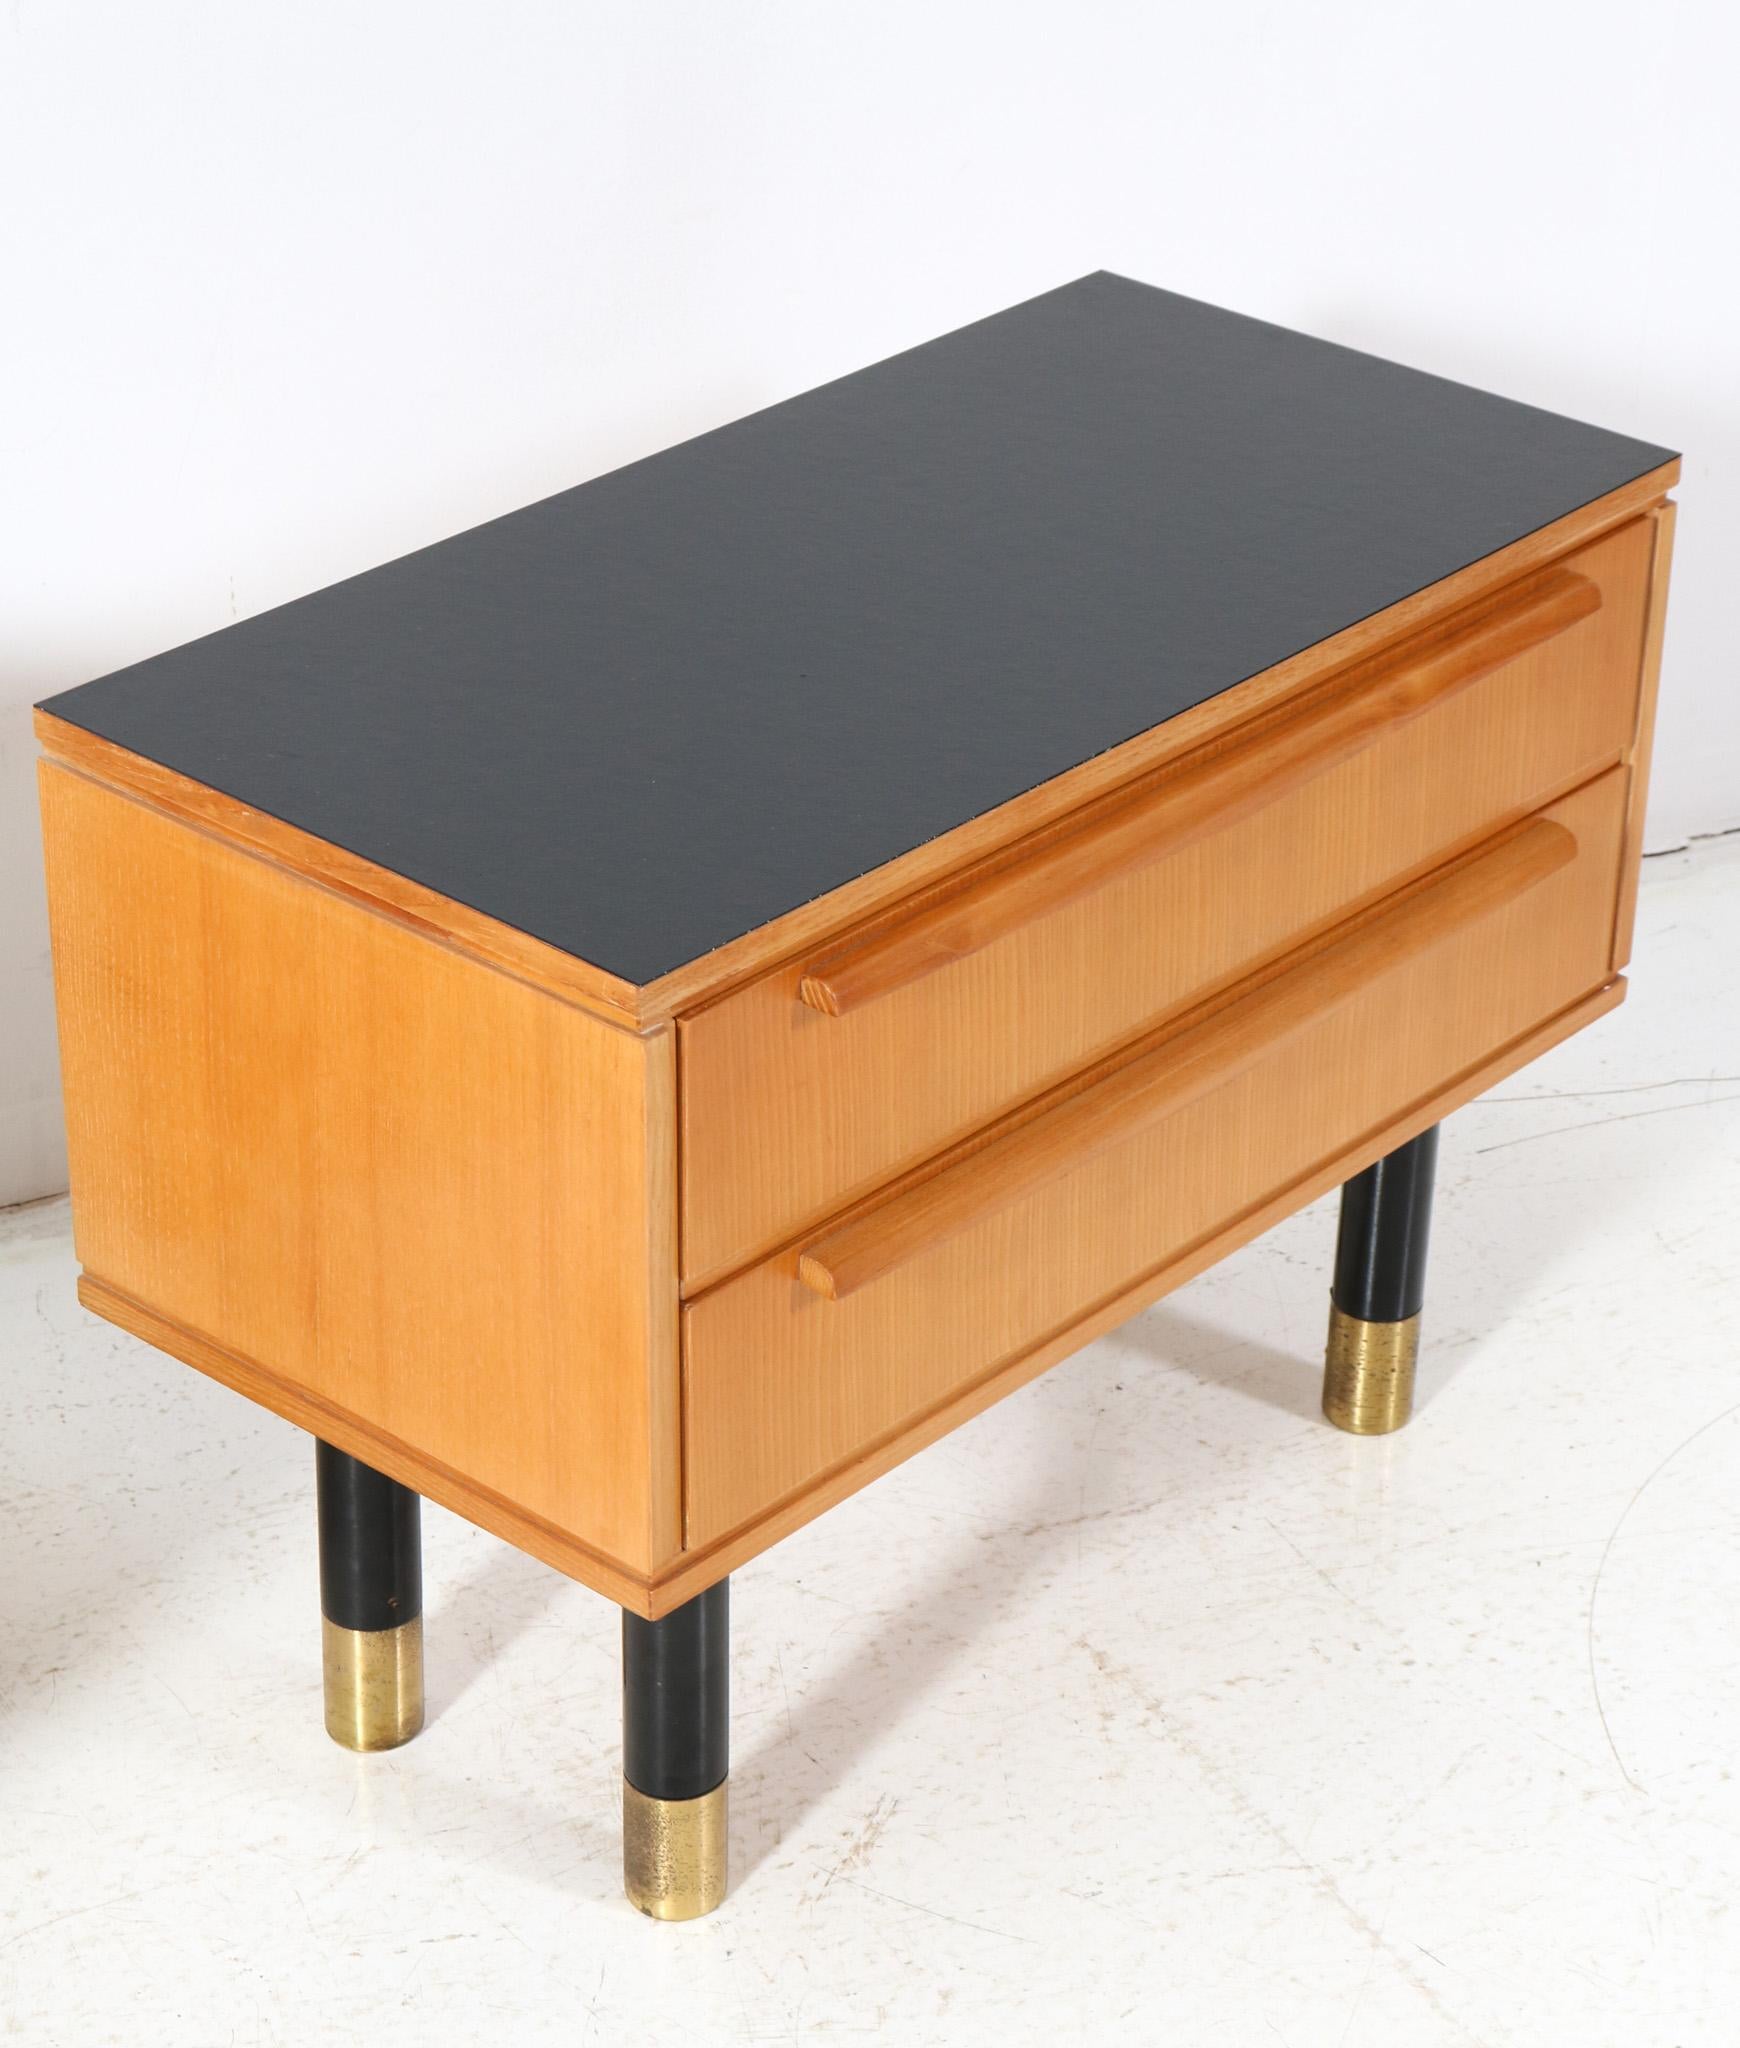 Two Ash Mid-Century Modern Nightstands or Bedside Tables, 1950s For Sale 2